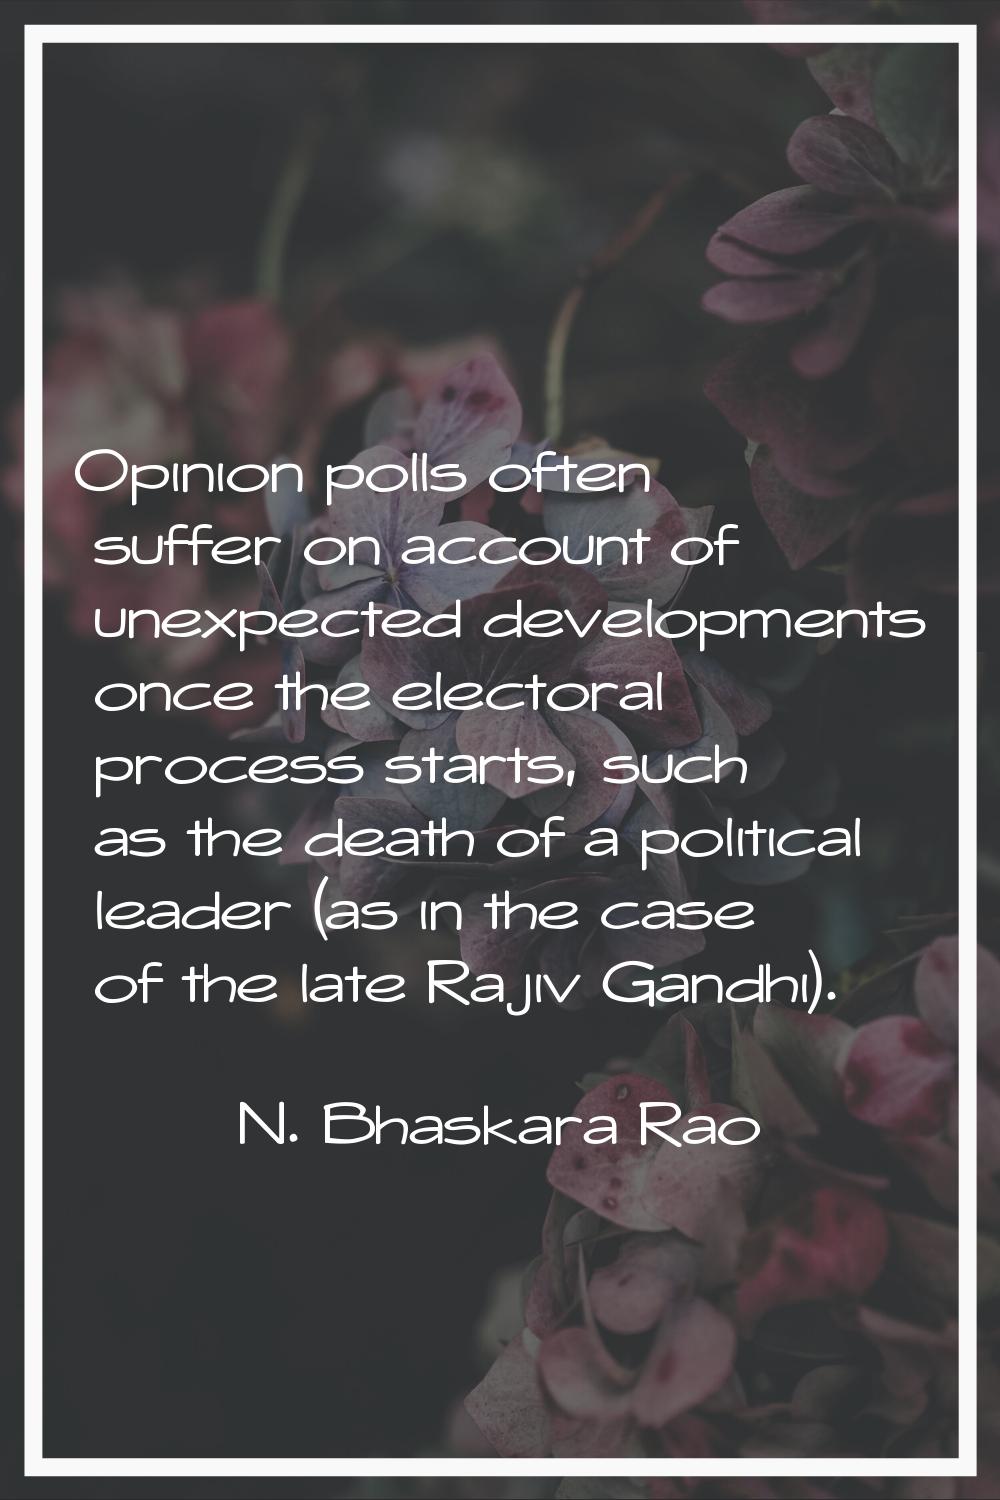 Opinion polls often suffer on account of unexpected developments once the electoral process starts,